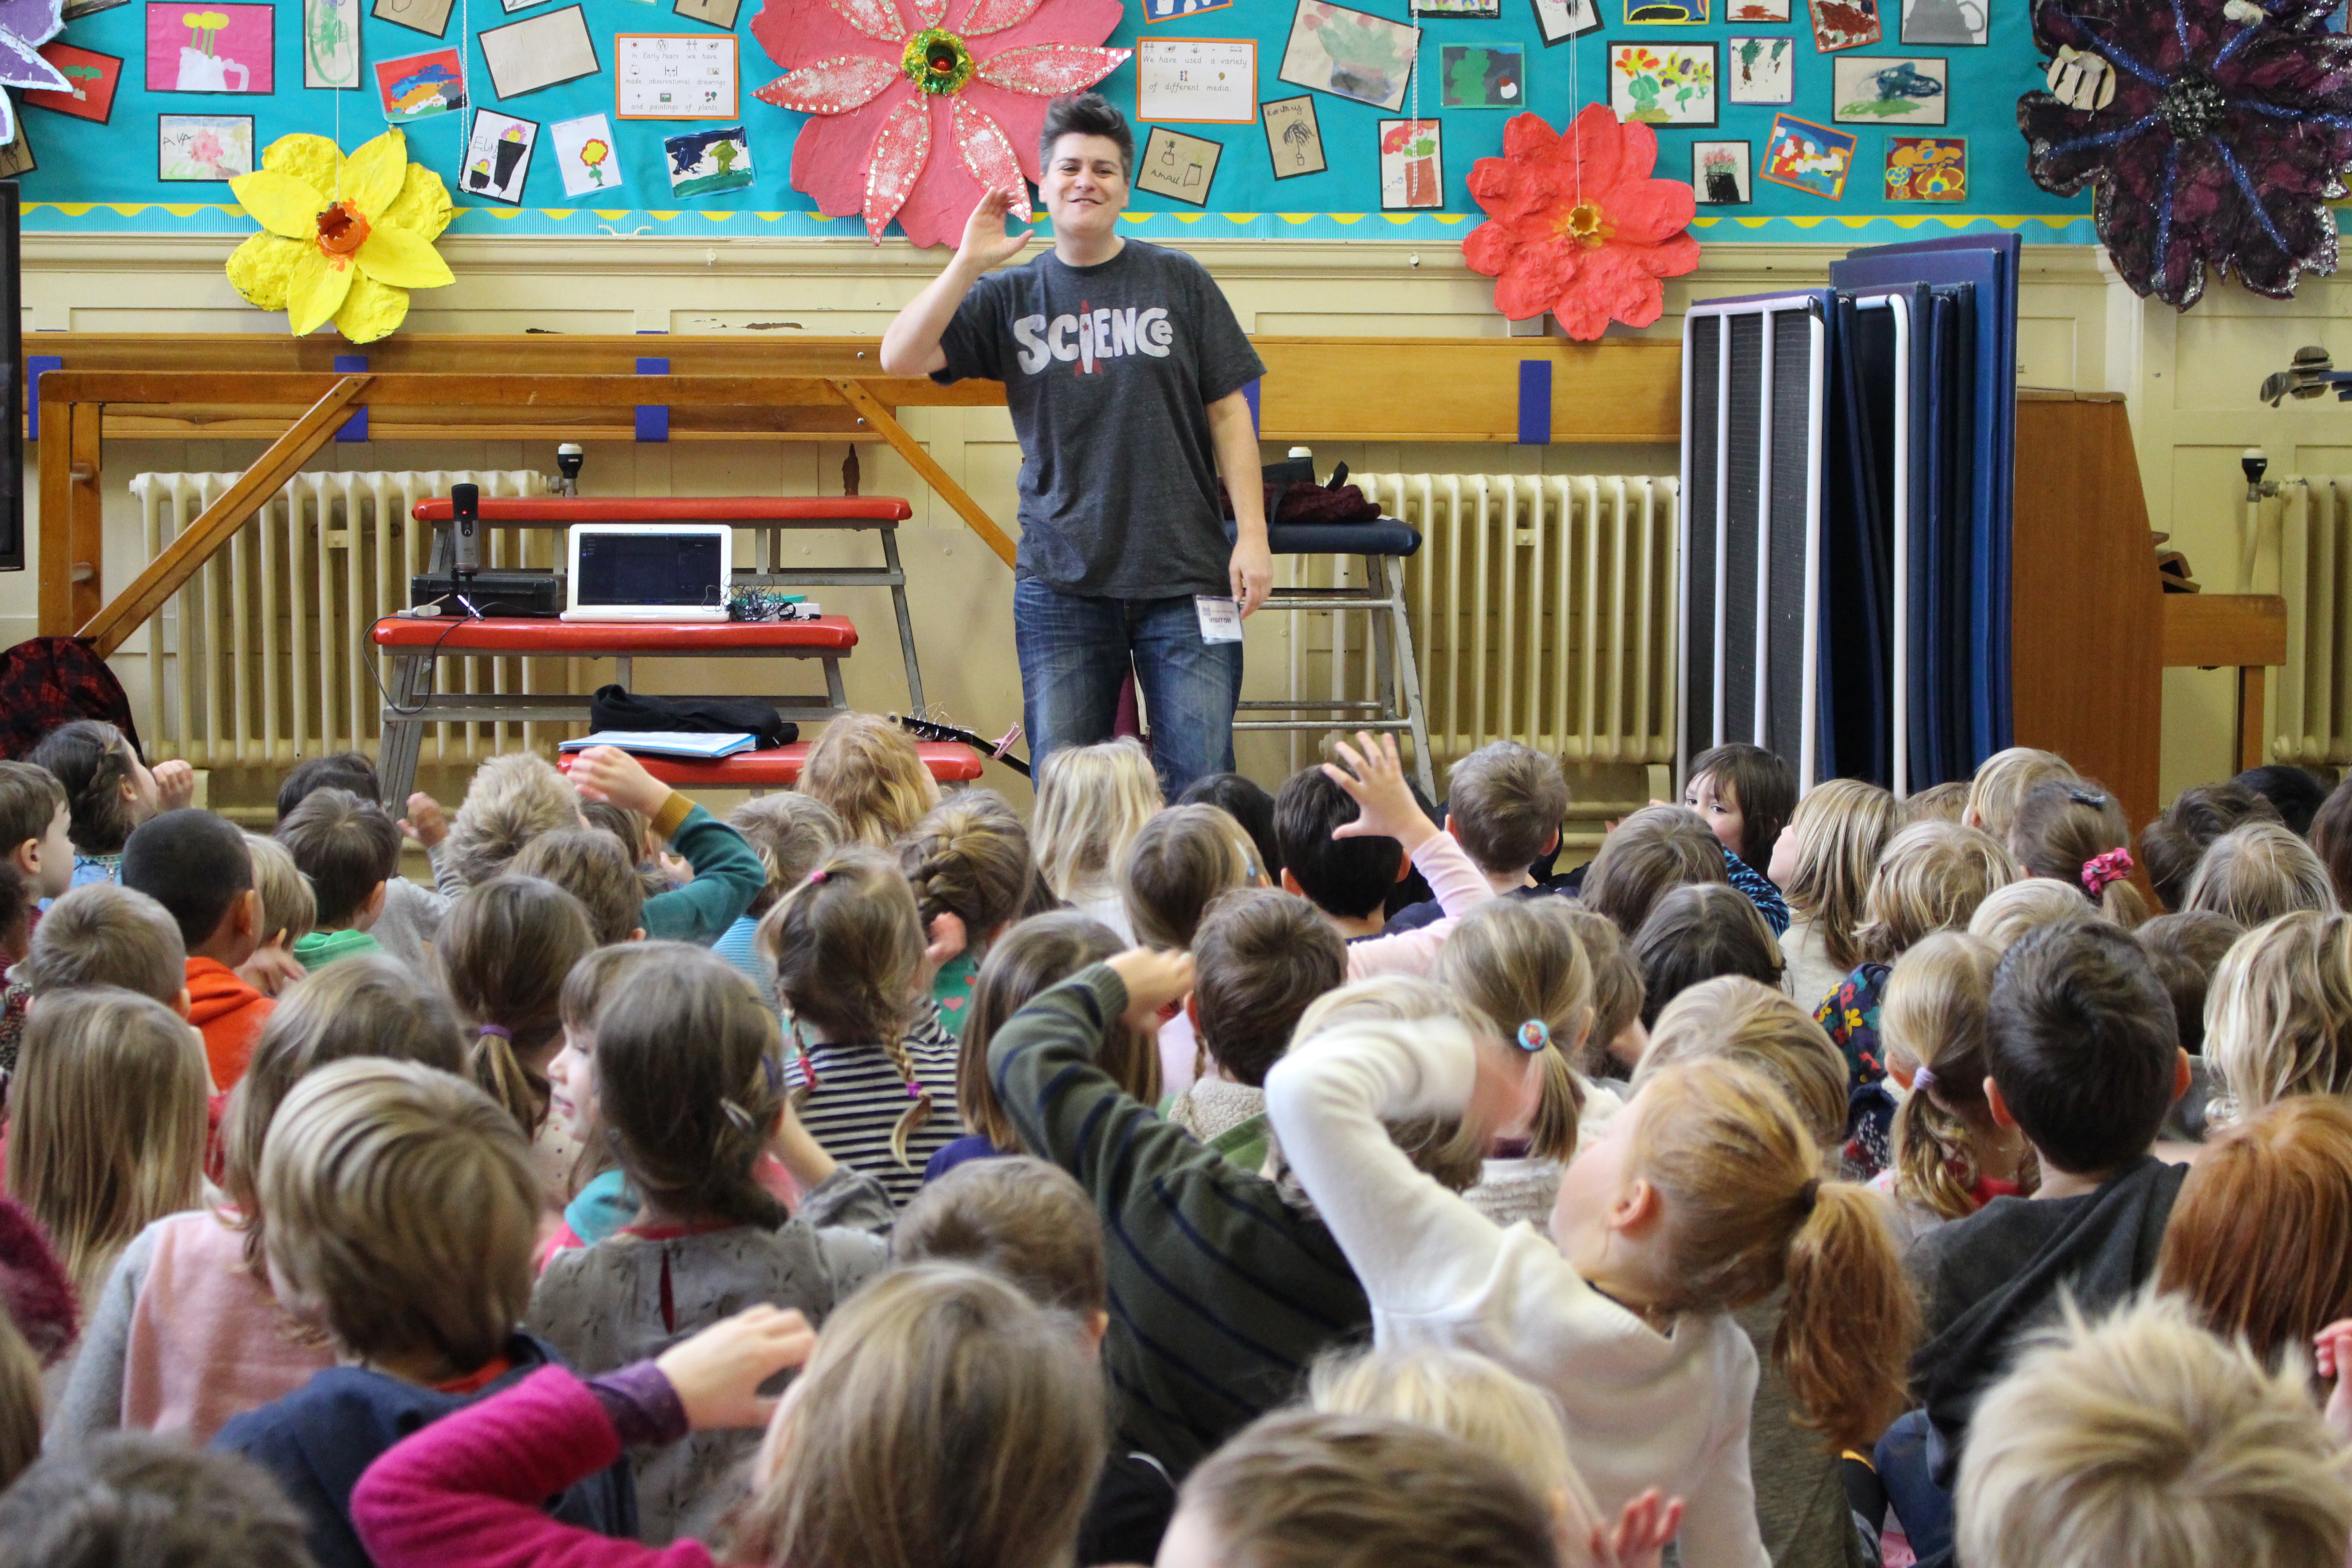 image of Al Start leading singing assembly with children singing and signing along